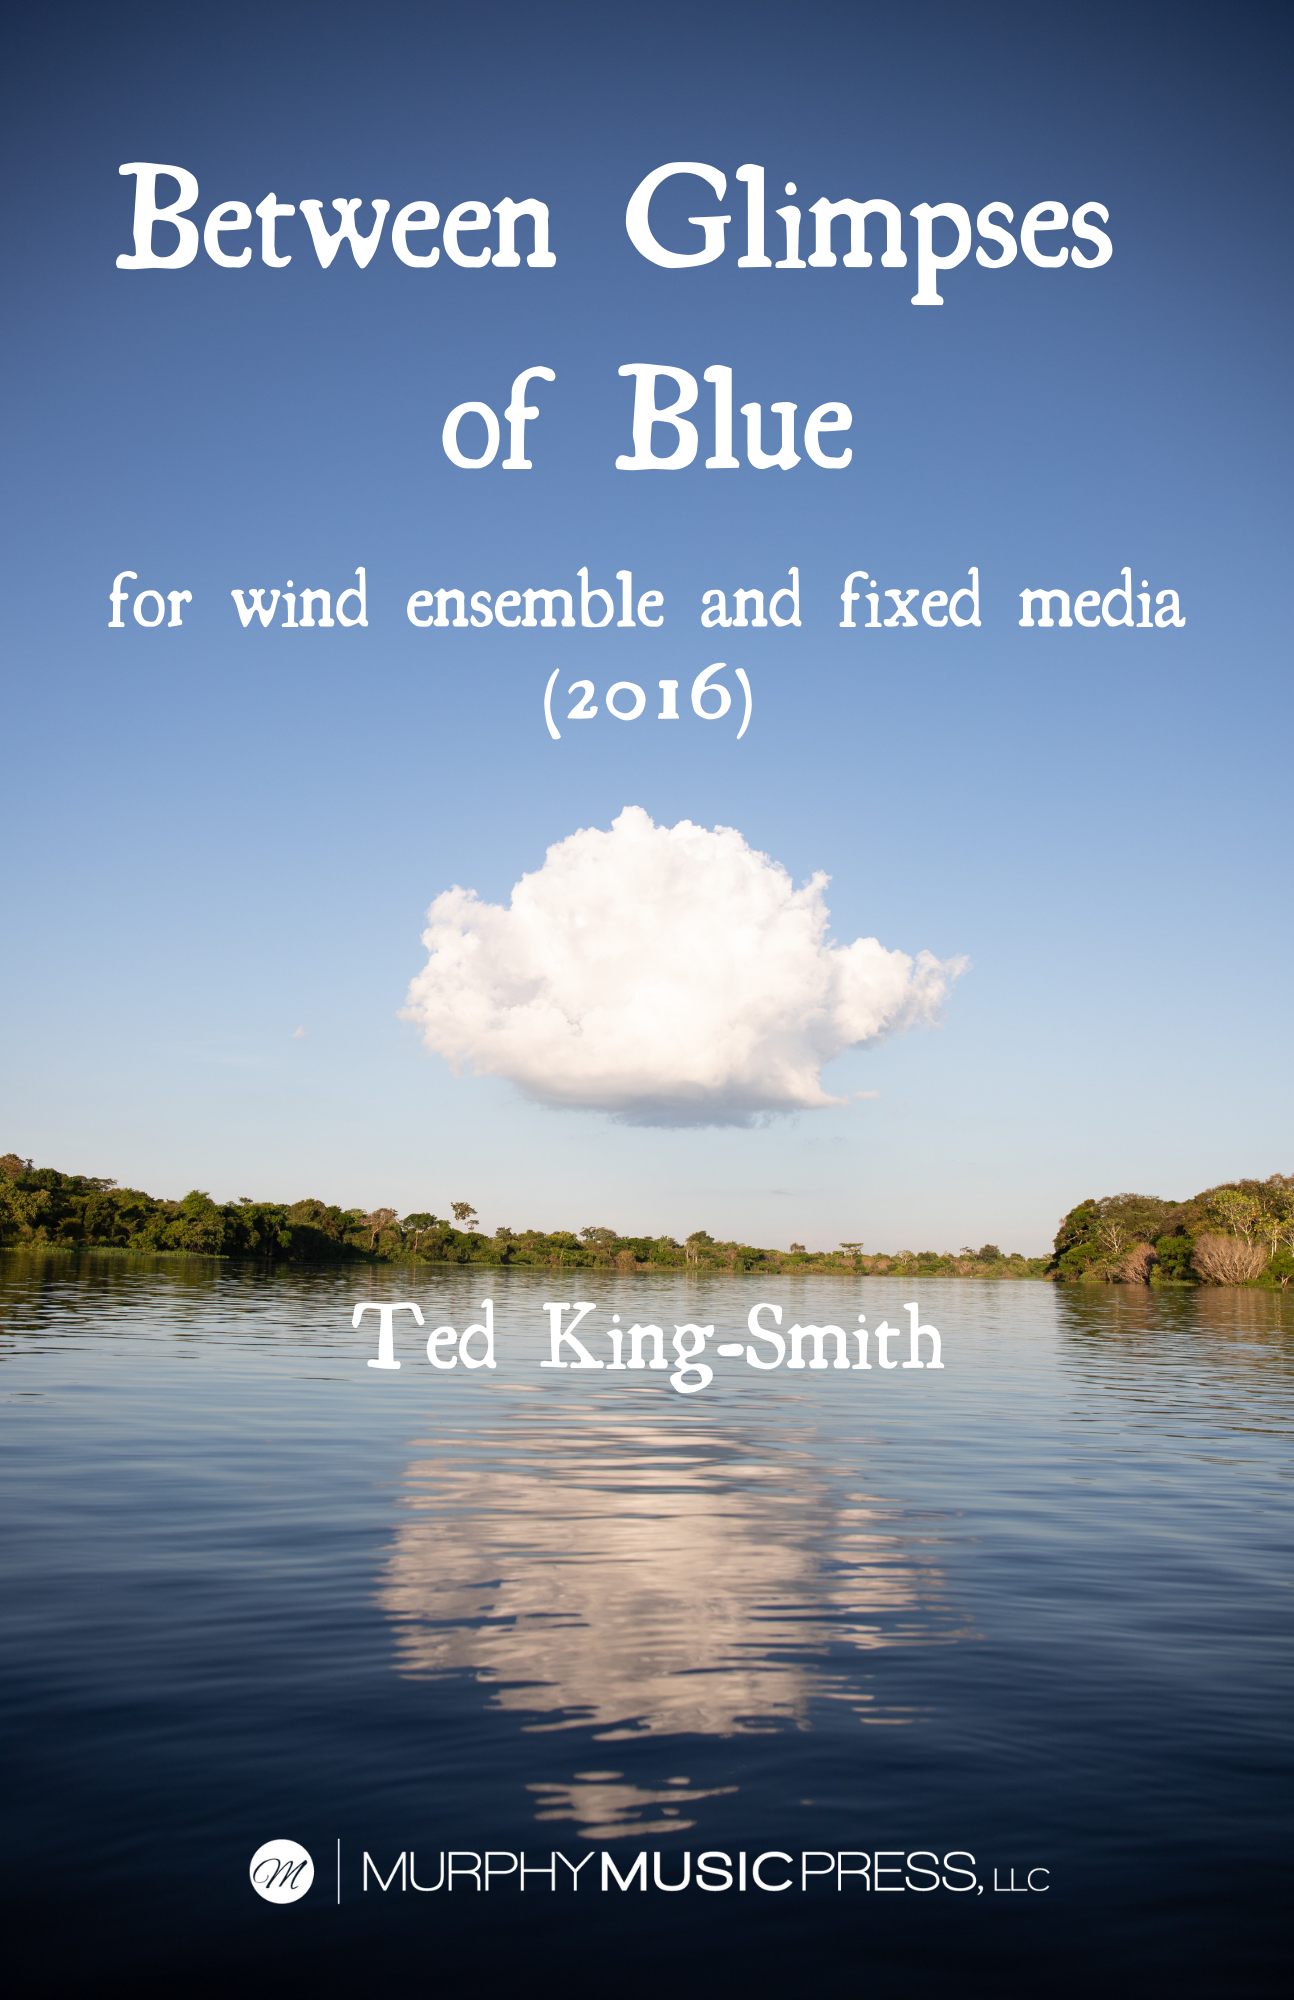 Between Glimpses Of Blue by Ted King-Smith